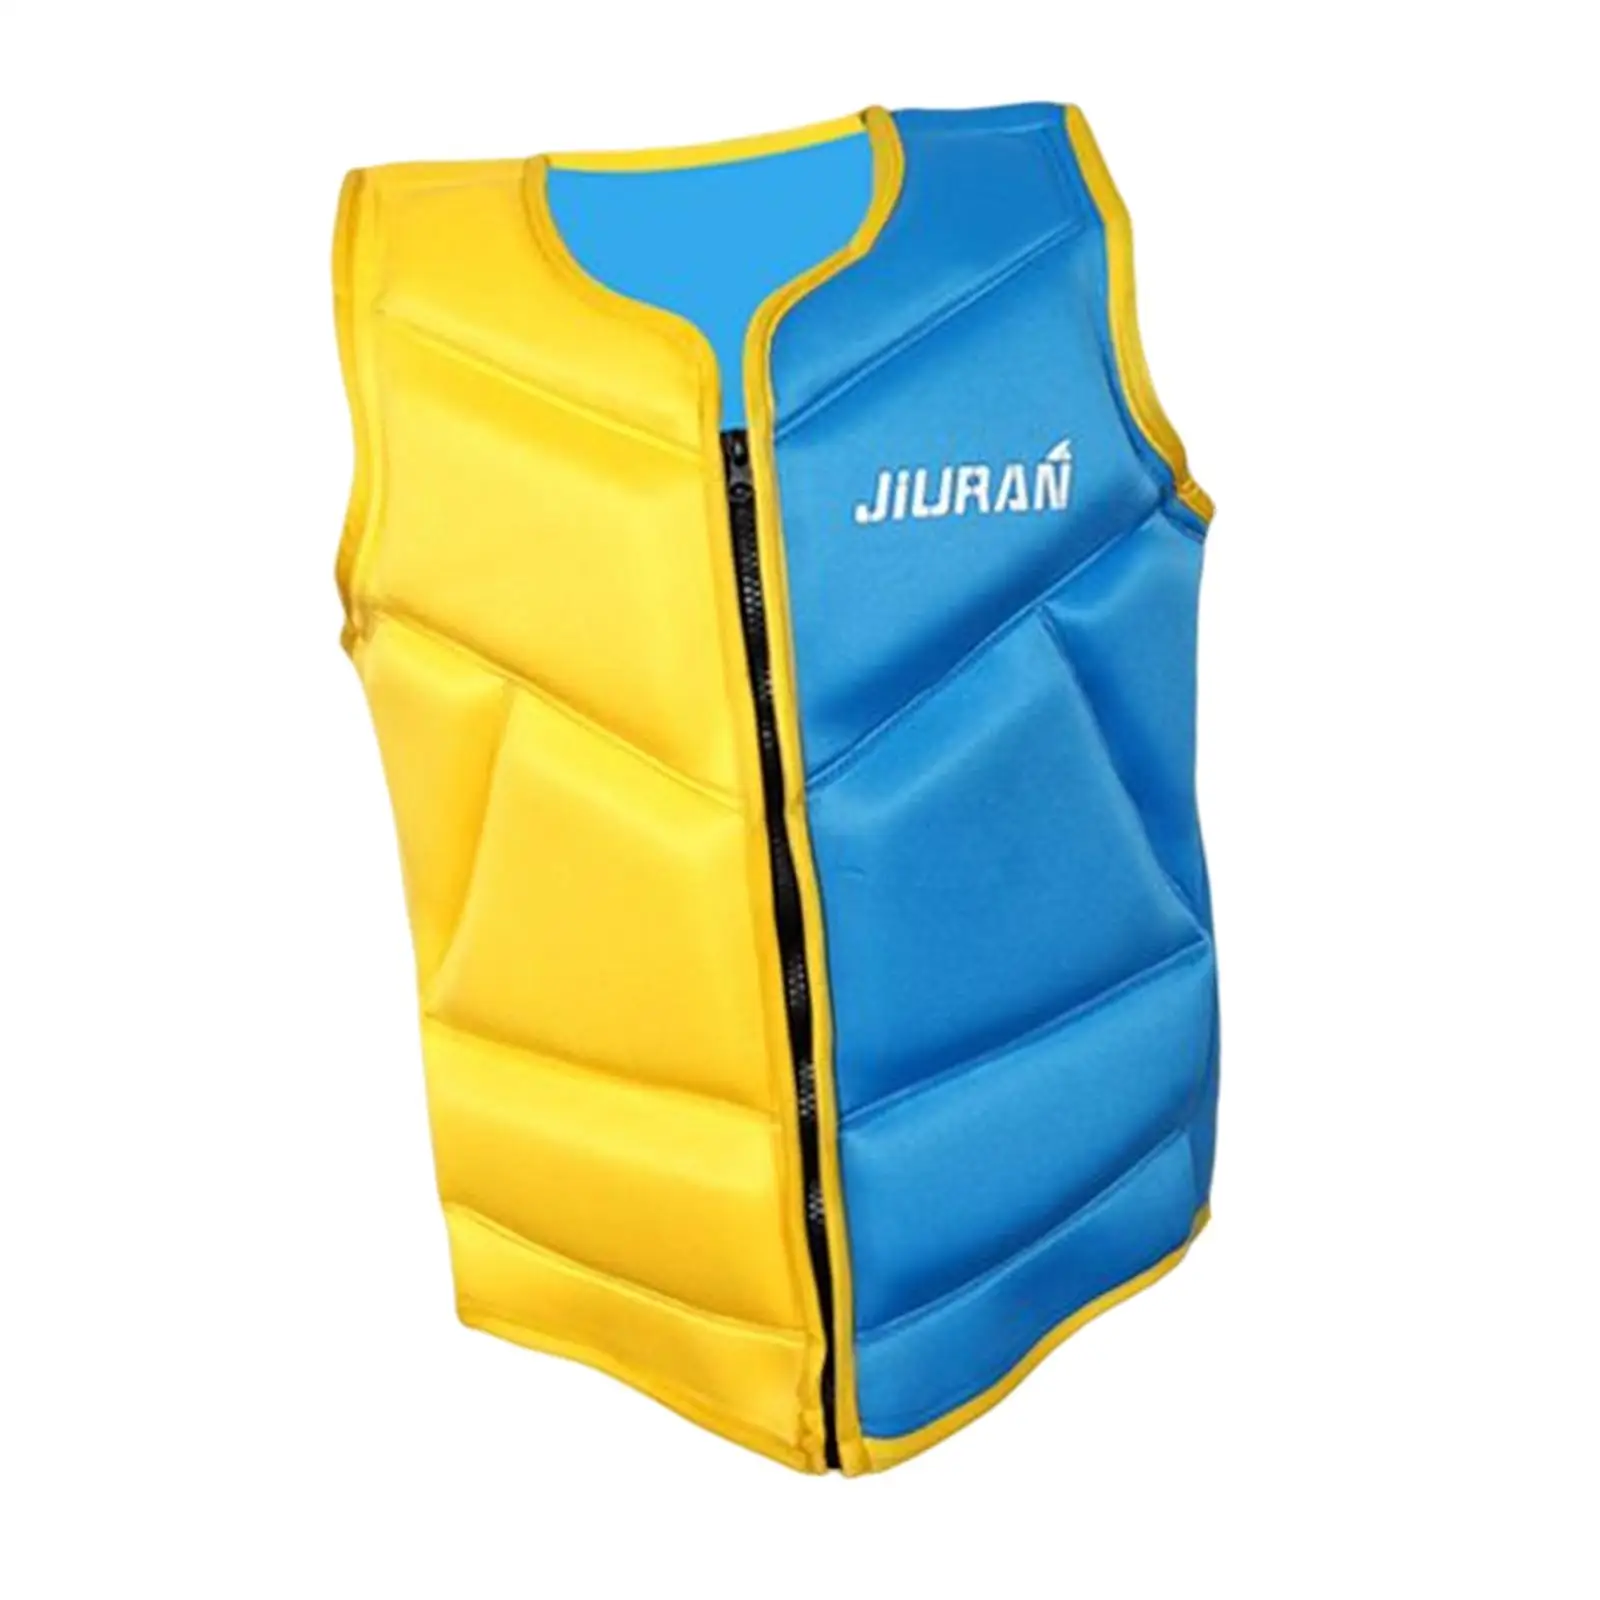 Youth Life Jacket Water Sports Vest Zipper Floating Vest Lightweight Water Jacket for Surfing Drifting Boating Adult Child